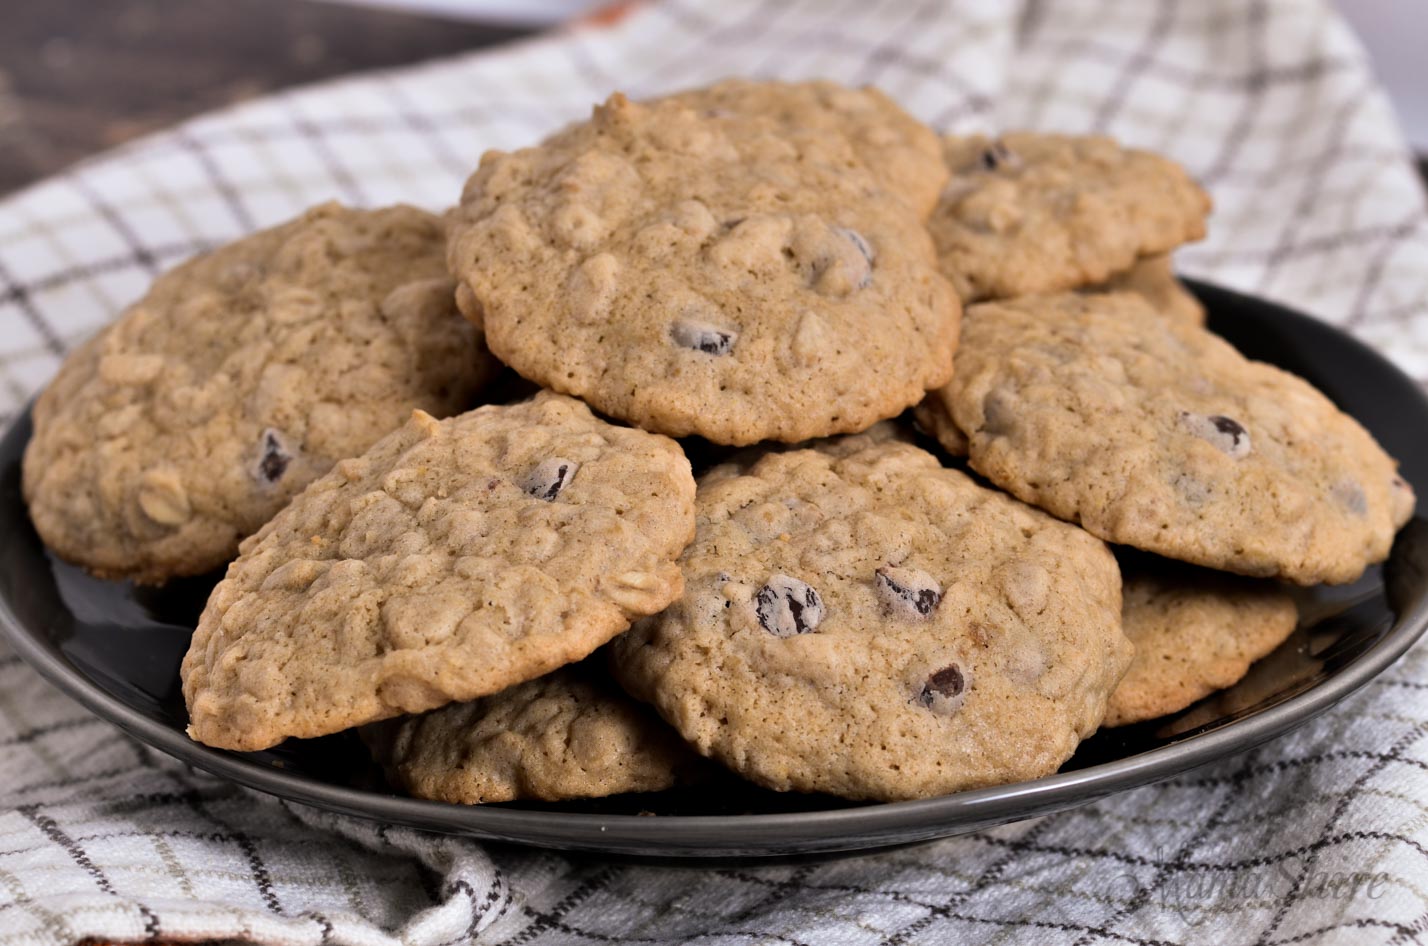 Oatmeal cookies with chocolate chip cookies on a black plate.